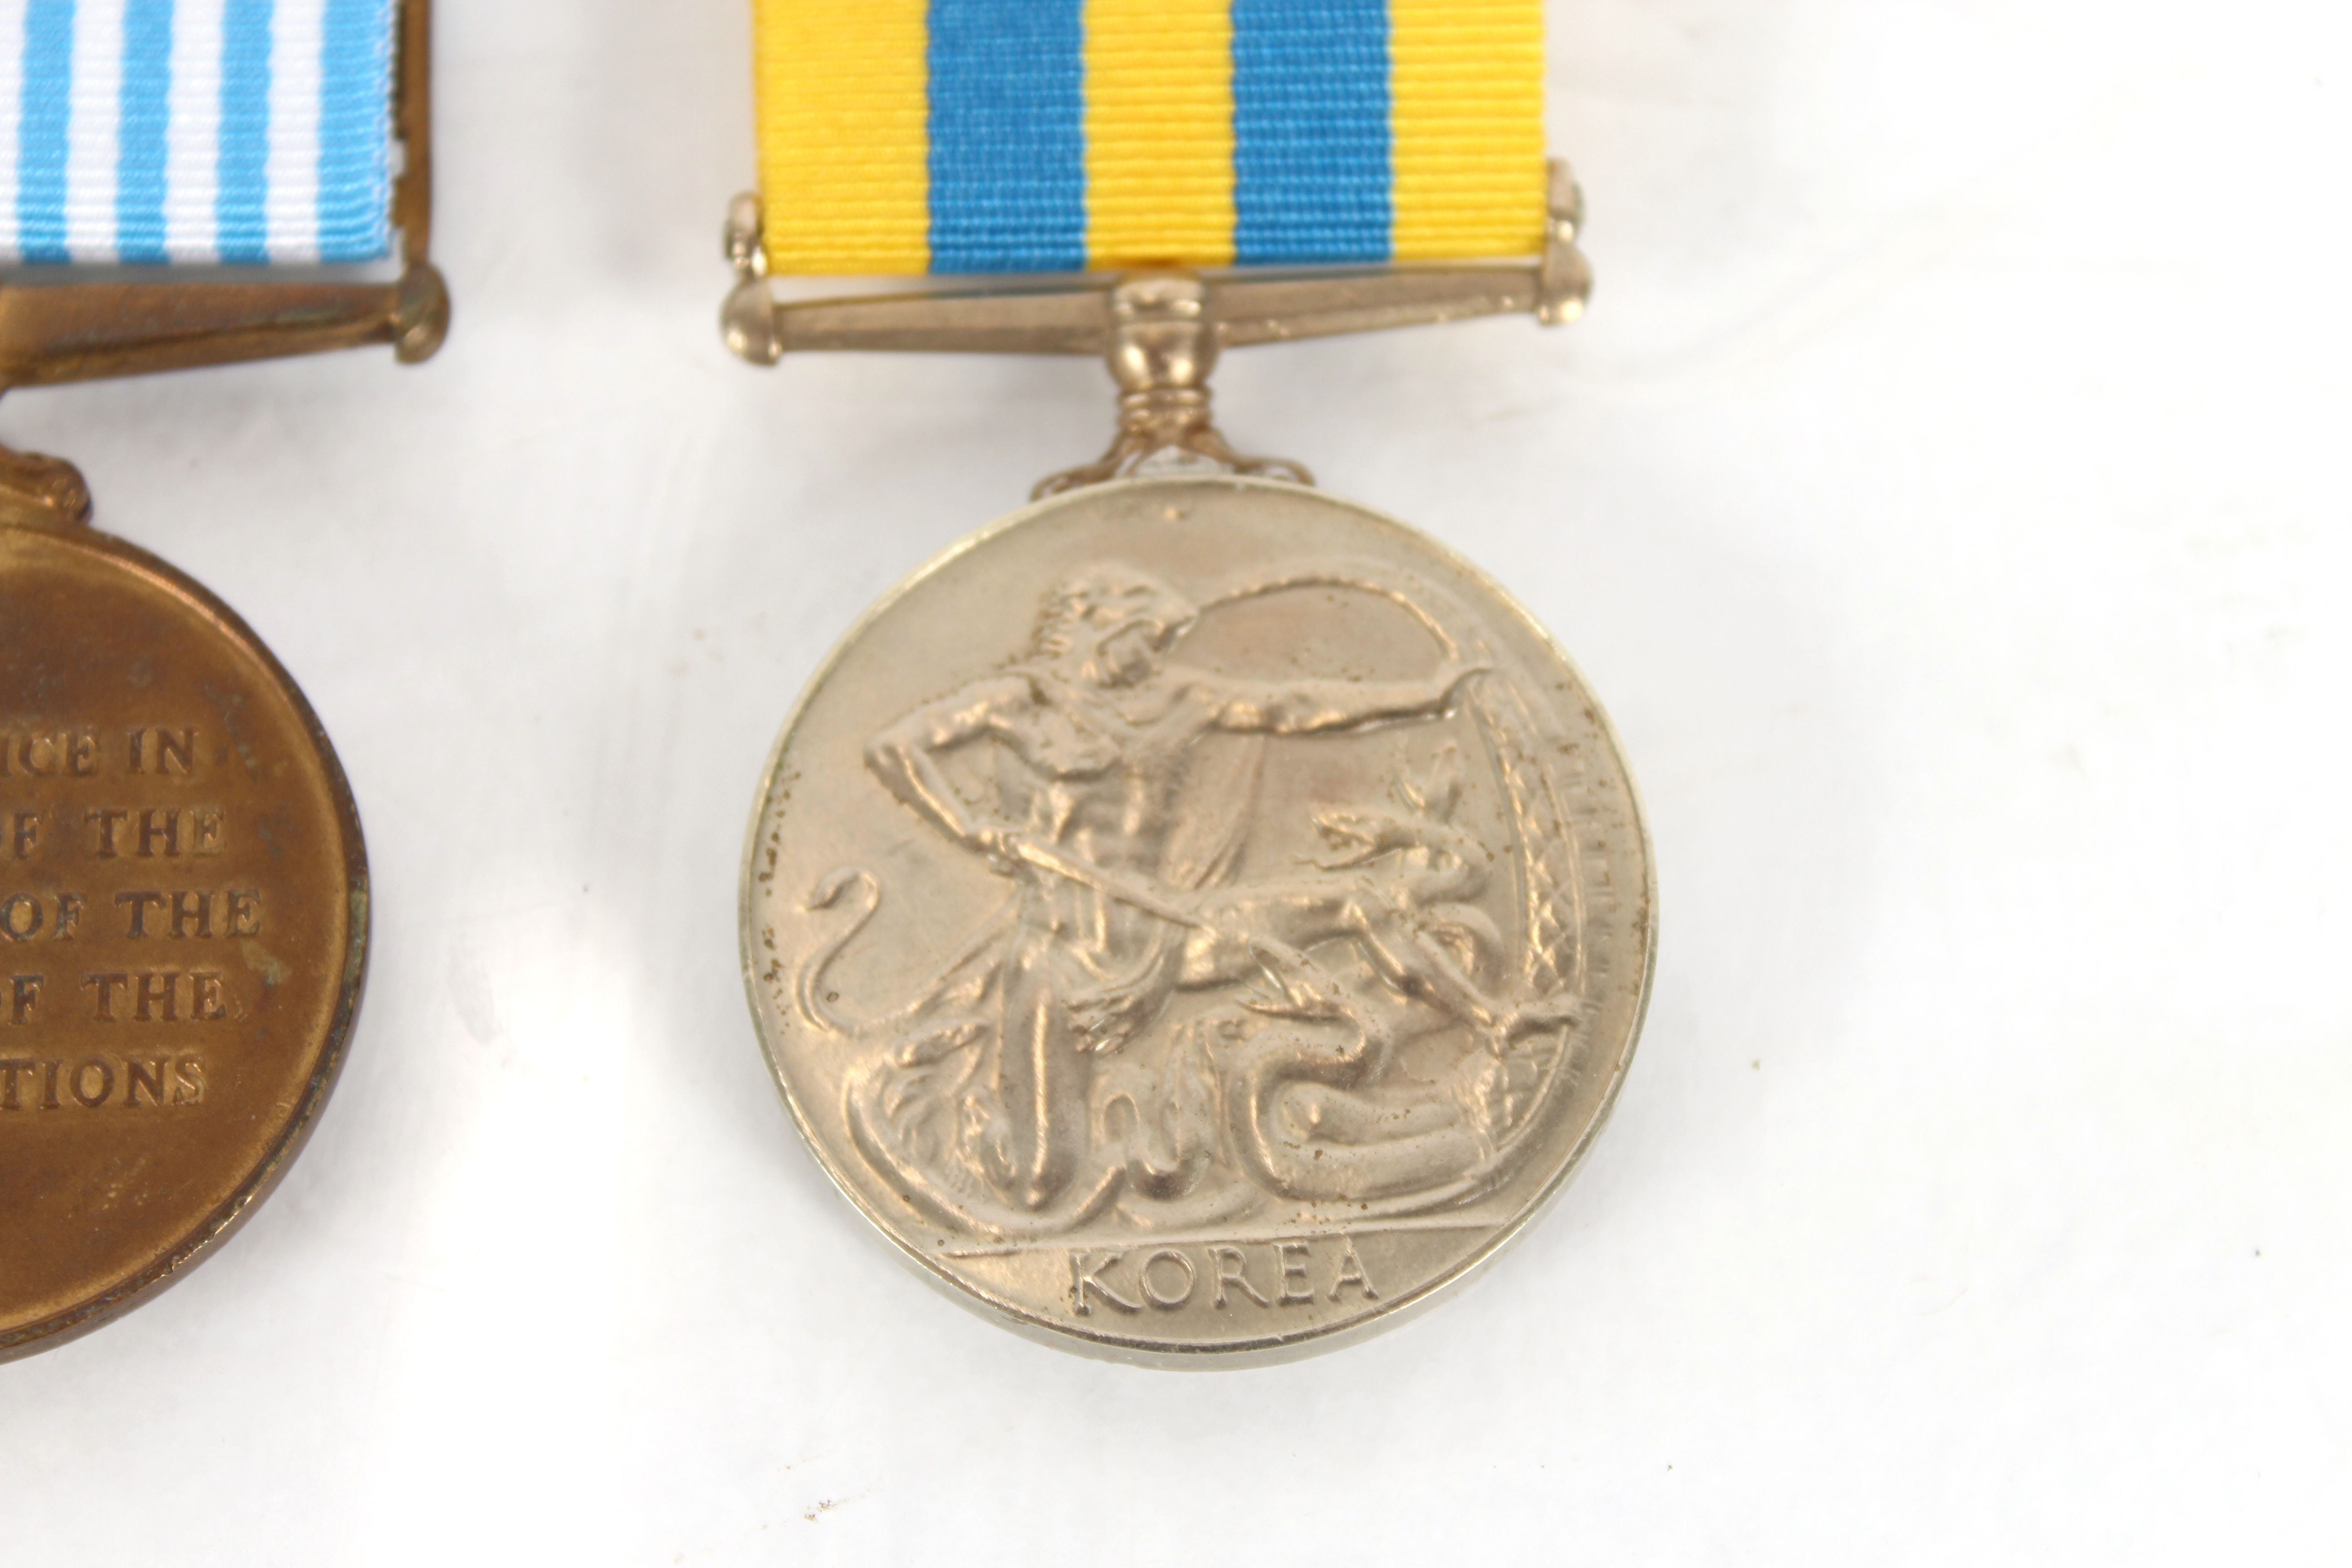 Two Korean medals to CSKX 8622719 D.H. Bowdidge Lm - Image 5 of 5